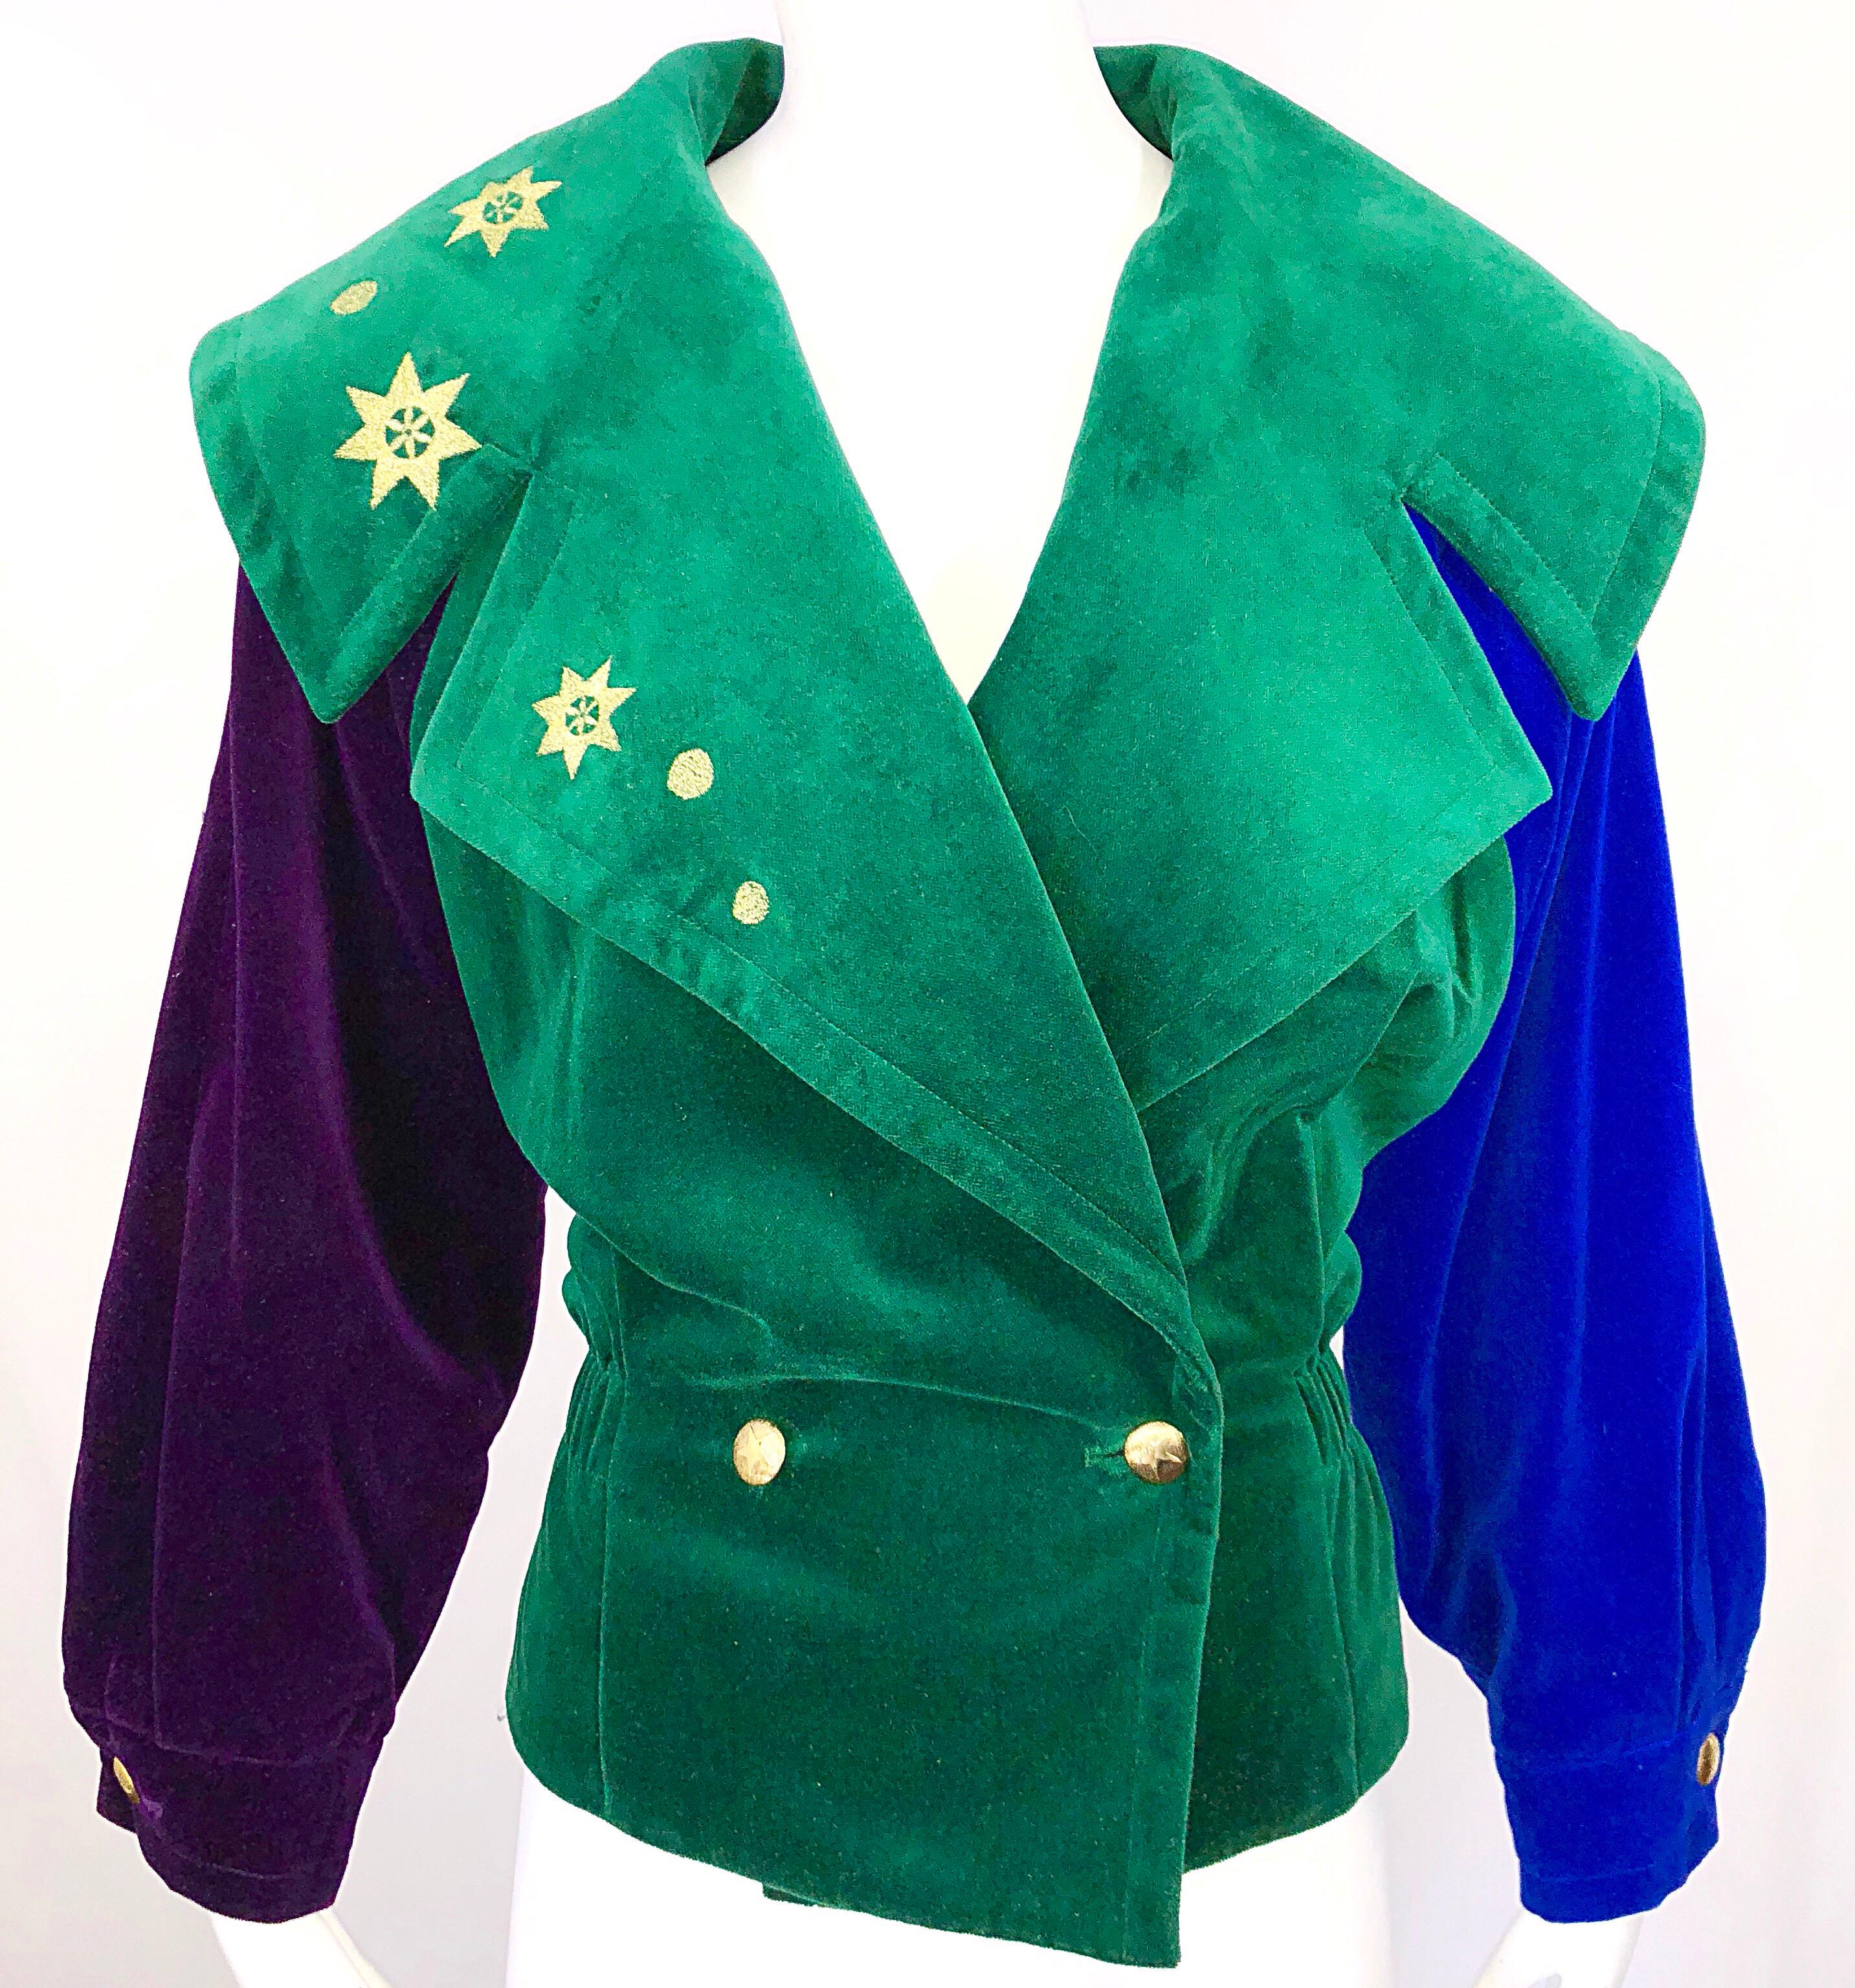 Fantastic Vintage Escada Avant Garde 1980s Embroidered Velvet 80s Bomber Jacket In Excellent Condition For Sale In San Diego, CA